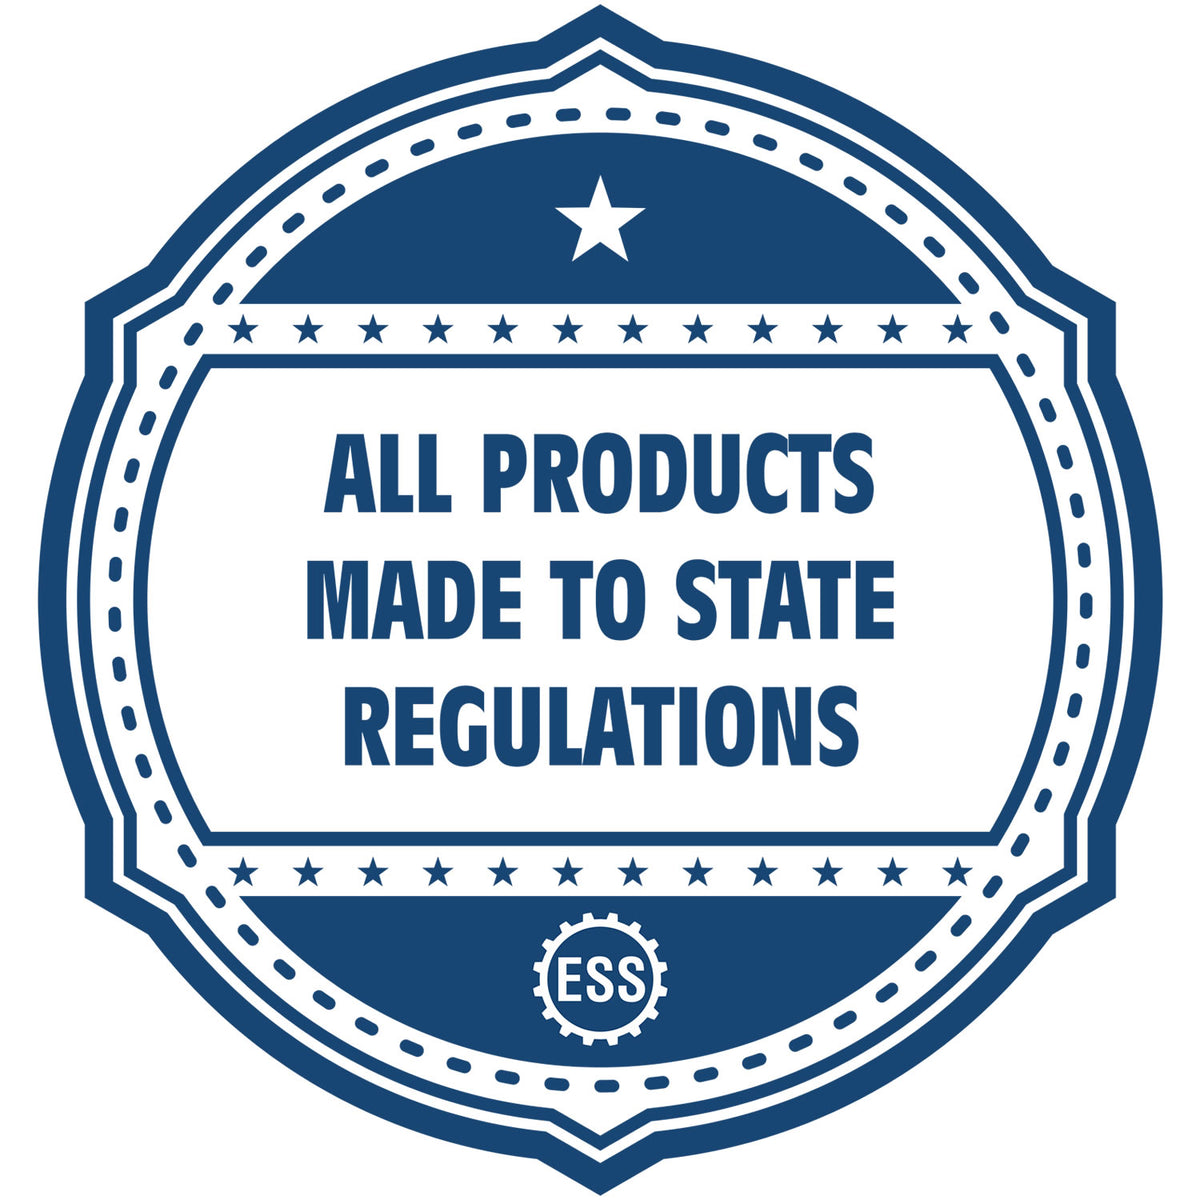 A blue icon or badge for the Gift Maryland Engineer Seal showing that this product is made in compliance with state regulations.